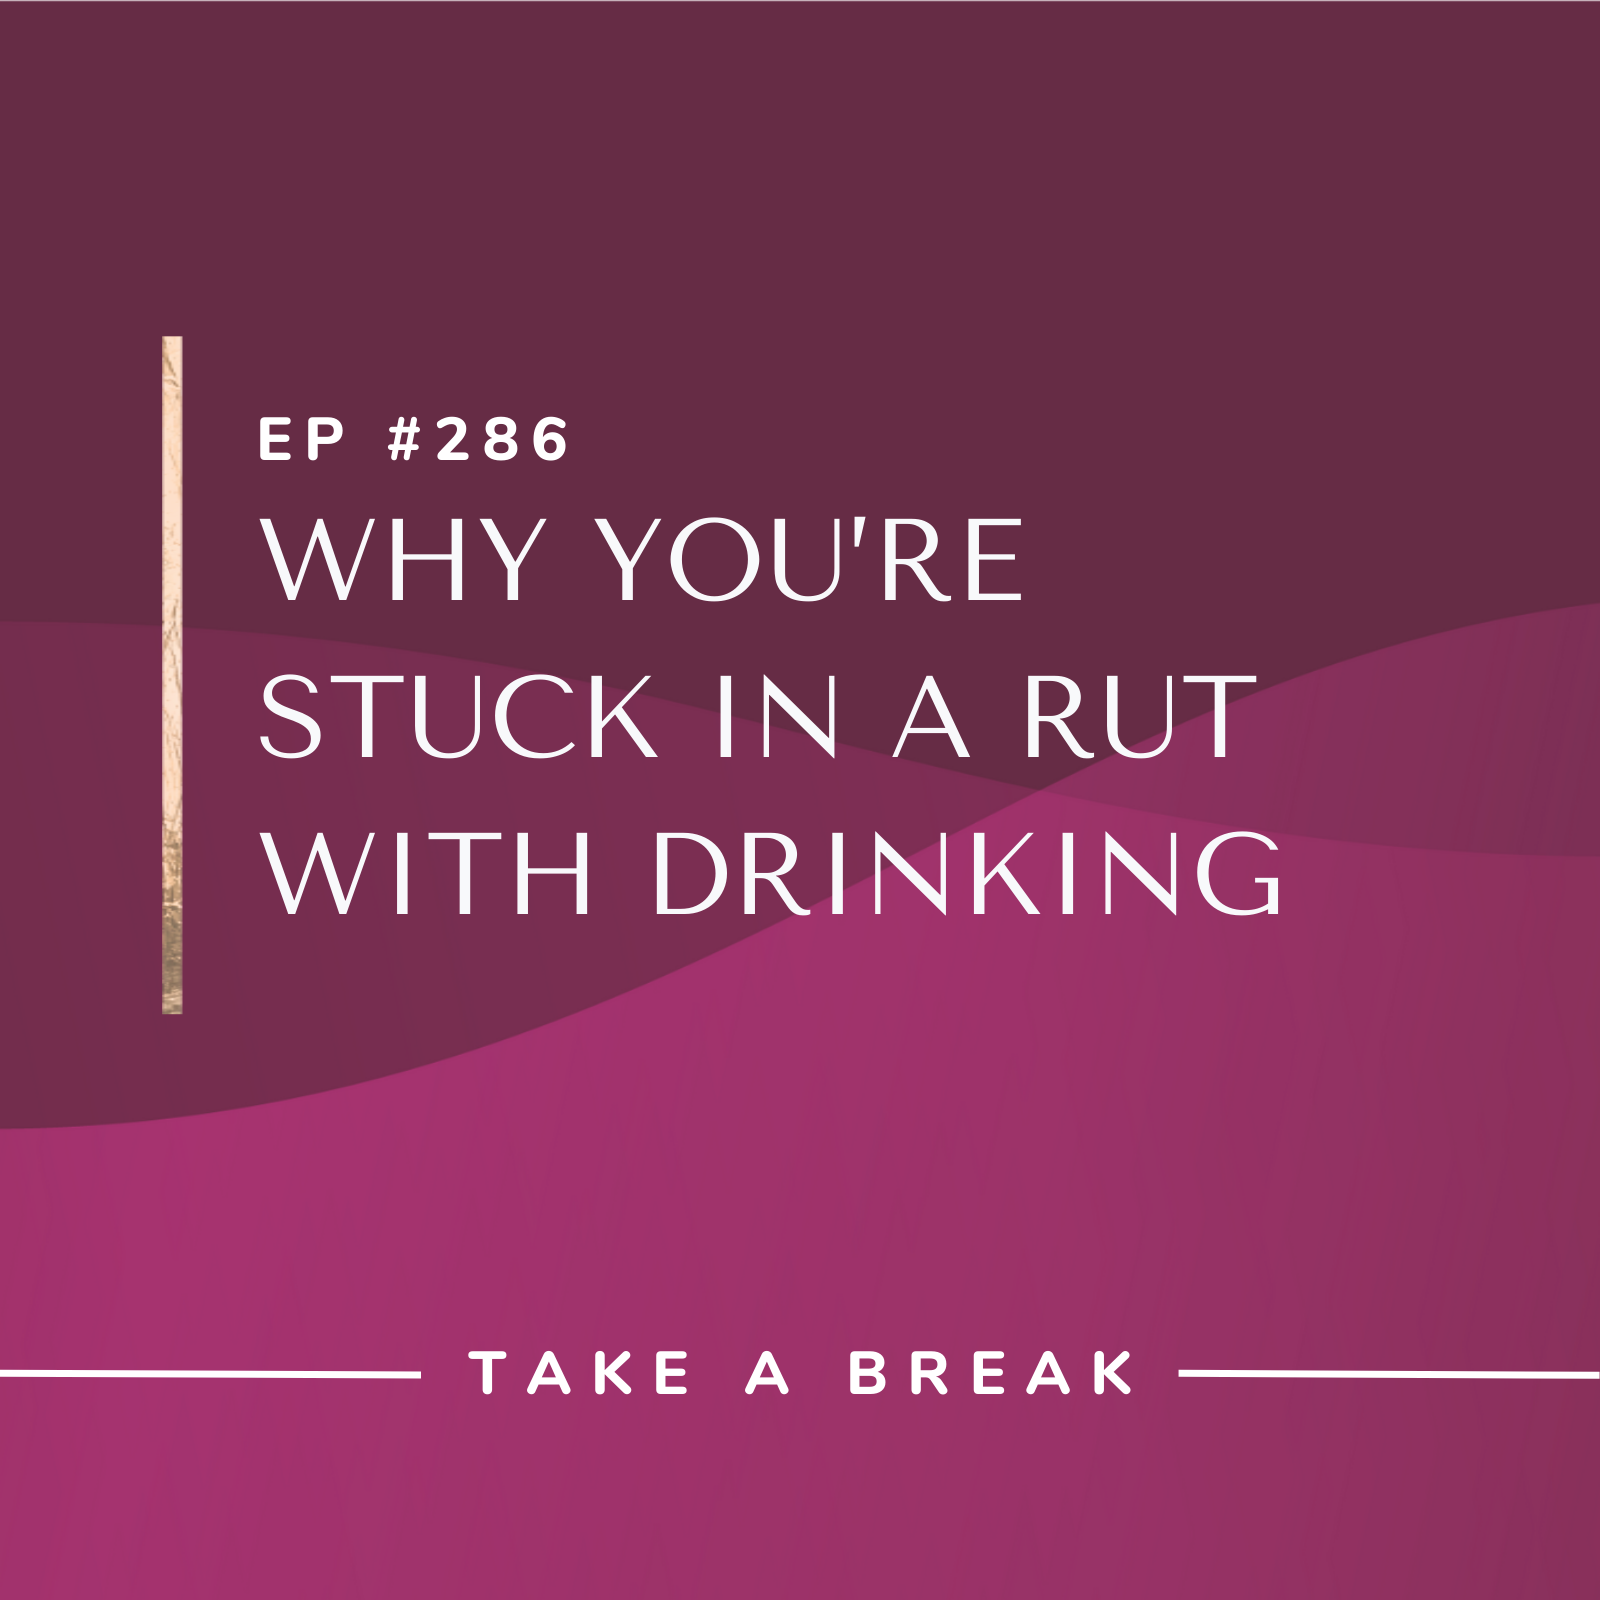 Take A Break from Drinking Why You’re Stuck in a Rut with Drinking